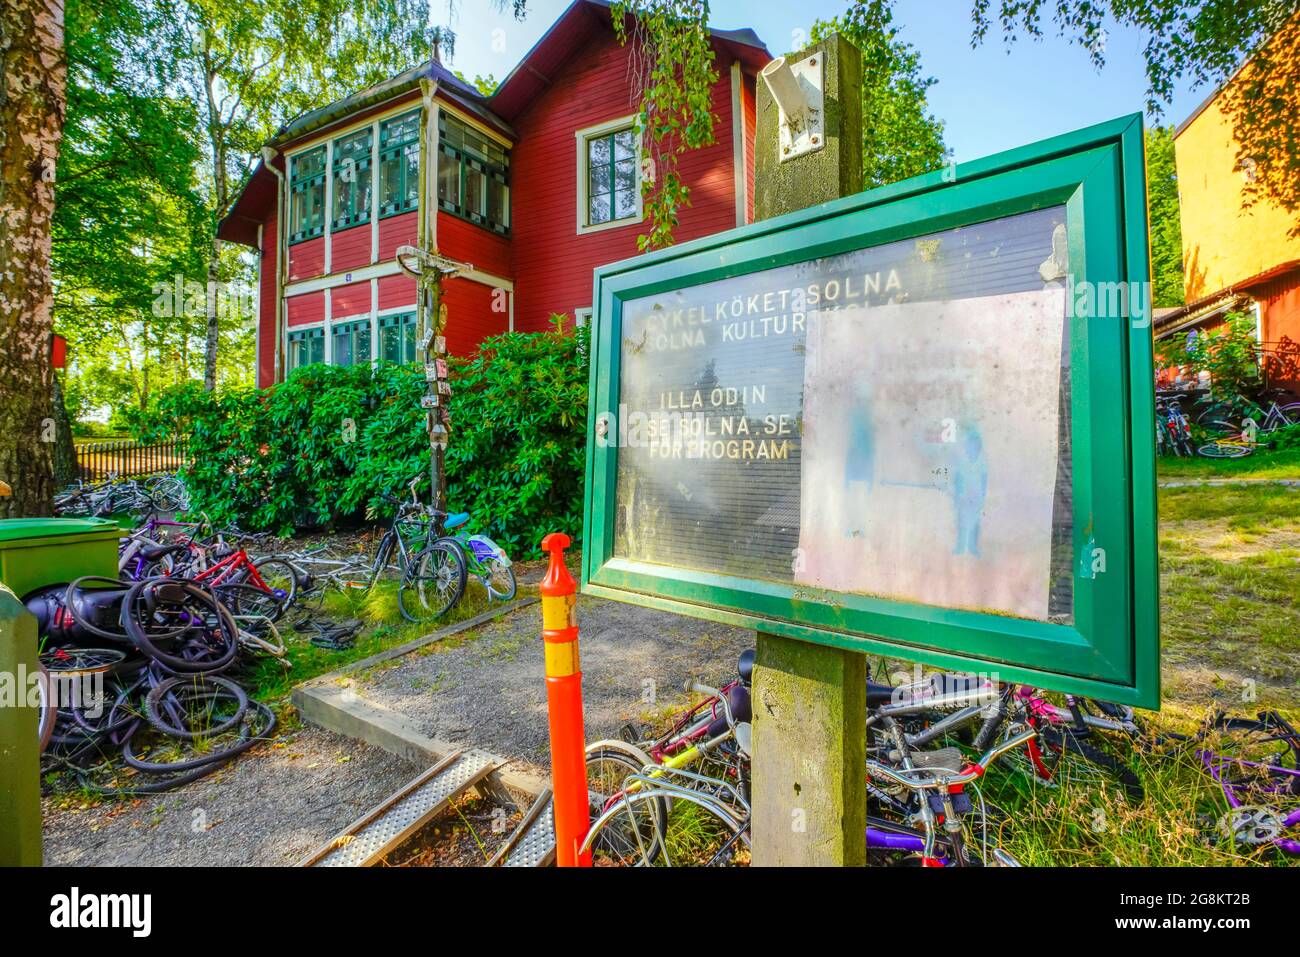 So-called bicycle kitchen Solna was founded as a non-profit association in 2013 in the garden of Villa Odin, the red-painted villa in the neighborhood Stock Photo